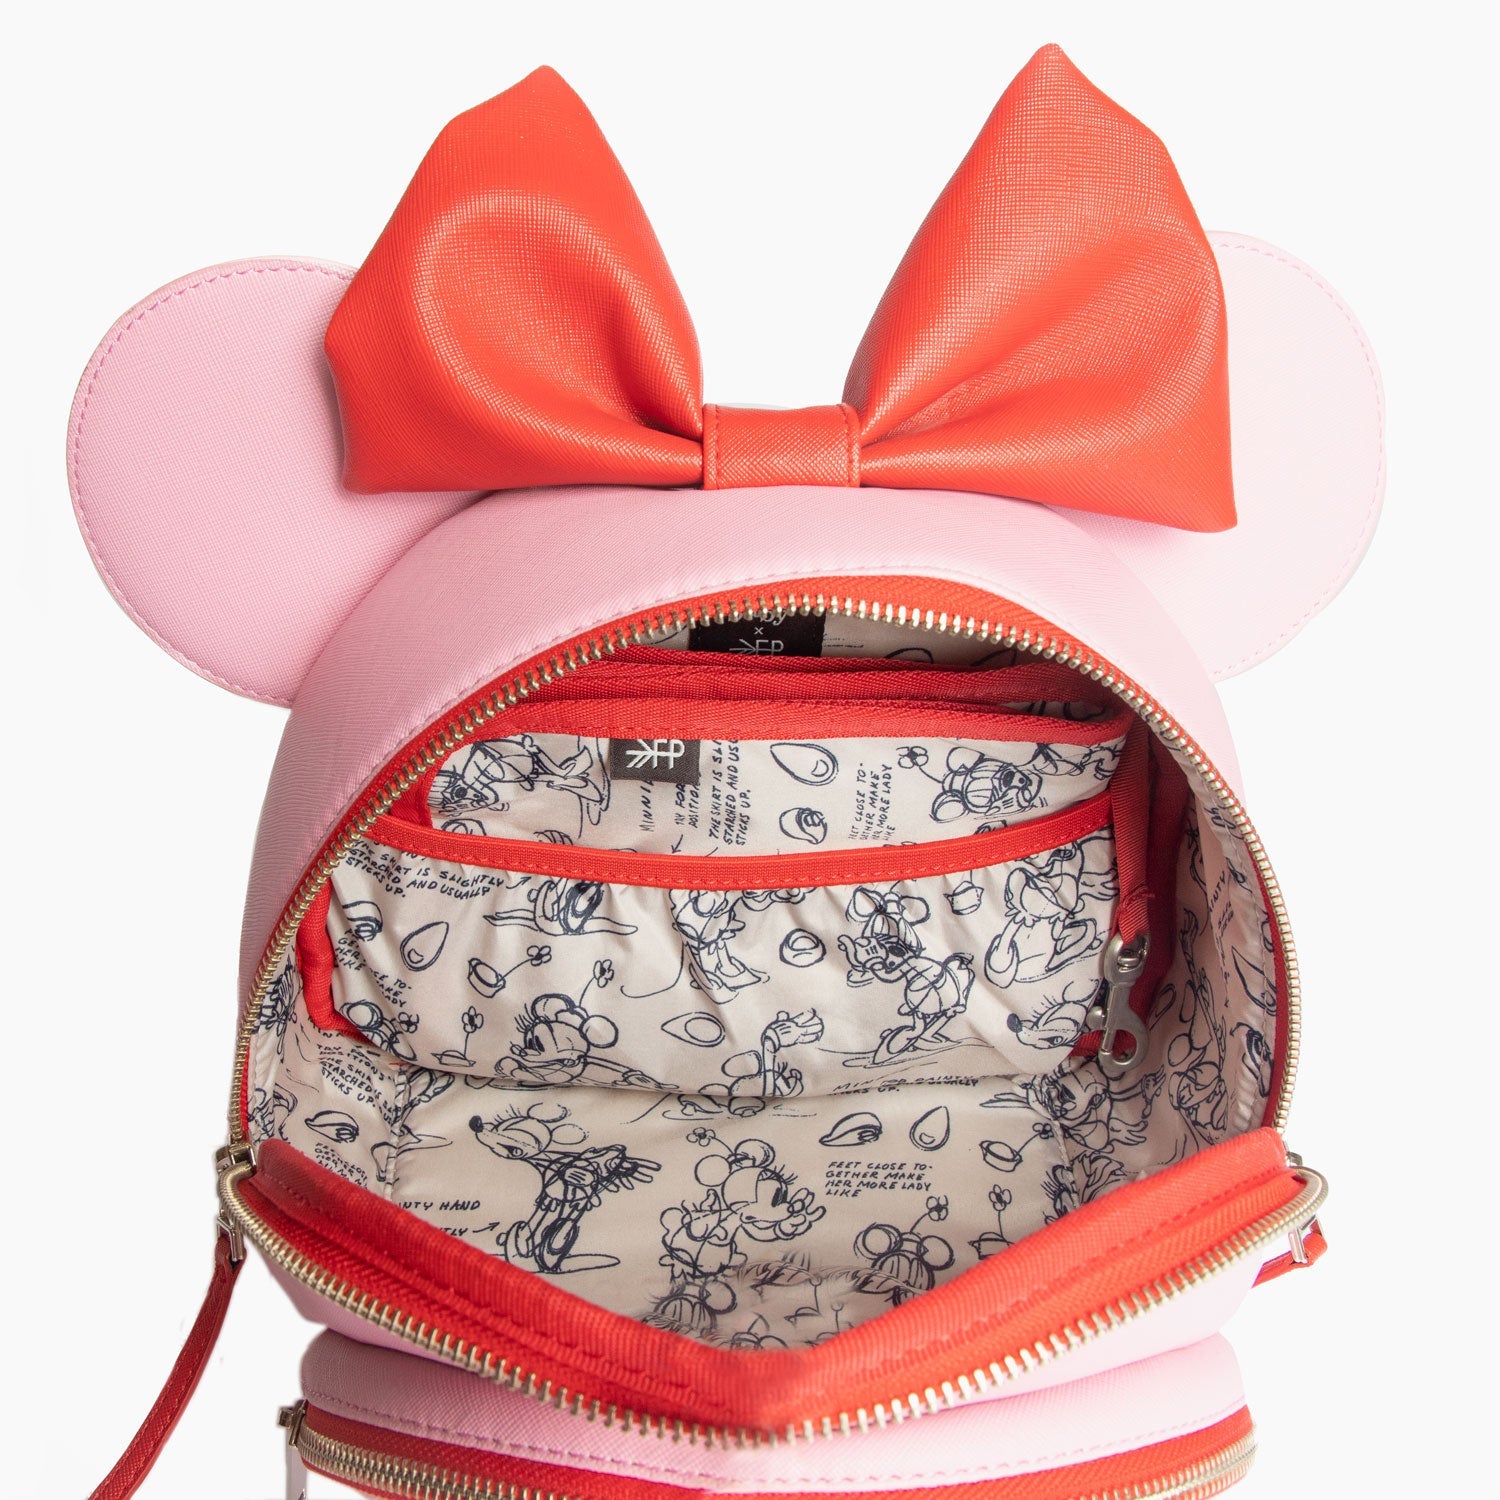 Minnie Mouse Purse Ears And Bow Cross Body Camera Bag/Holder Small | eBay